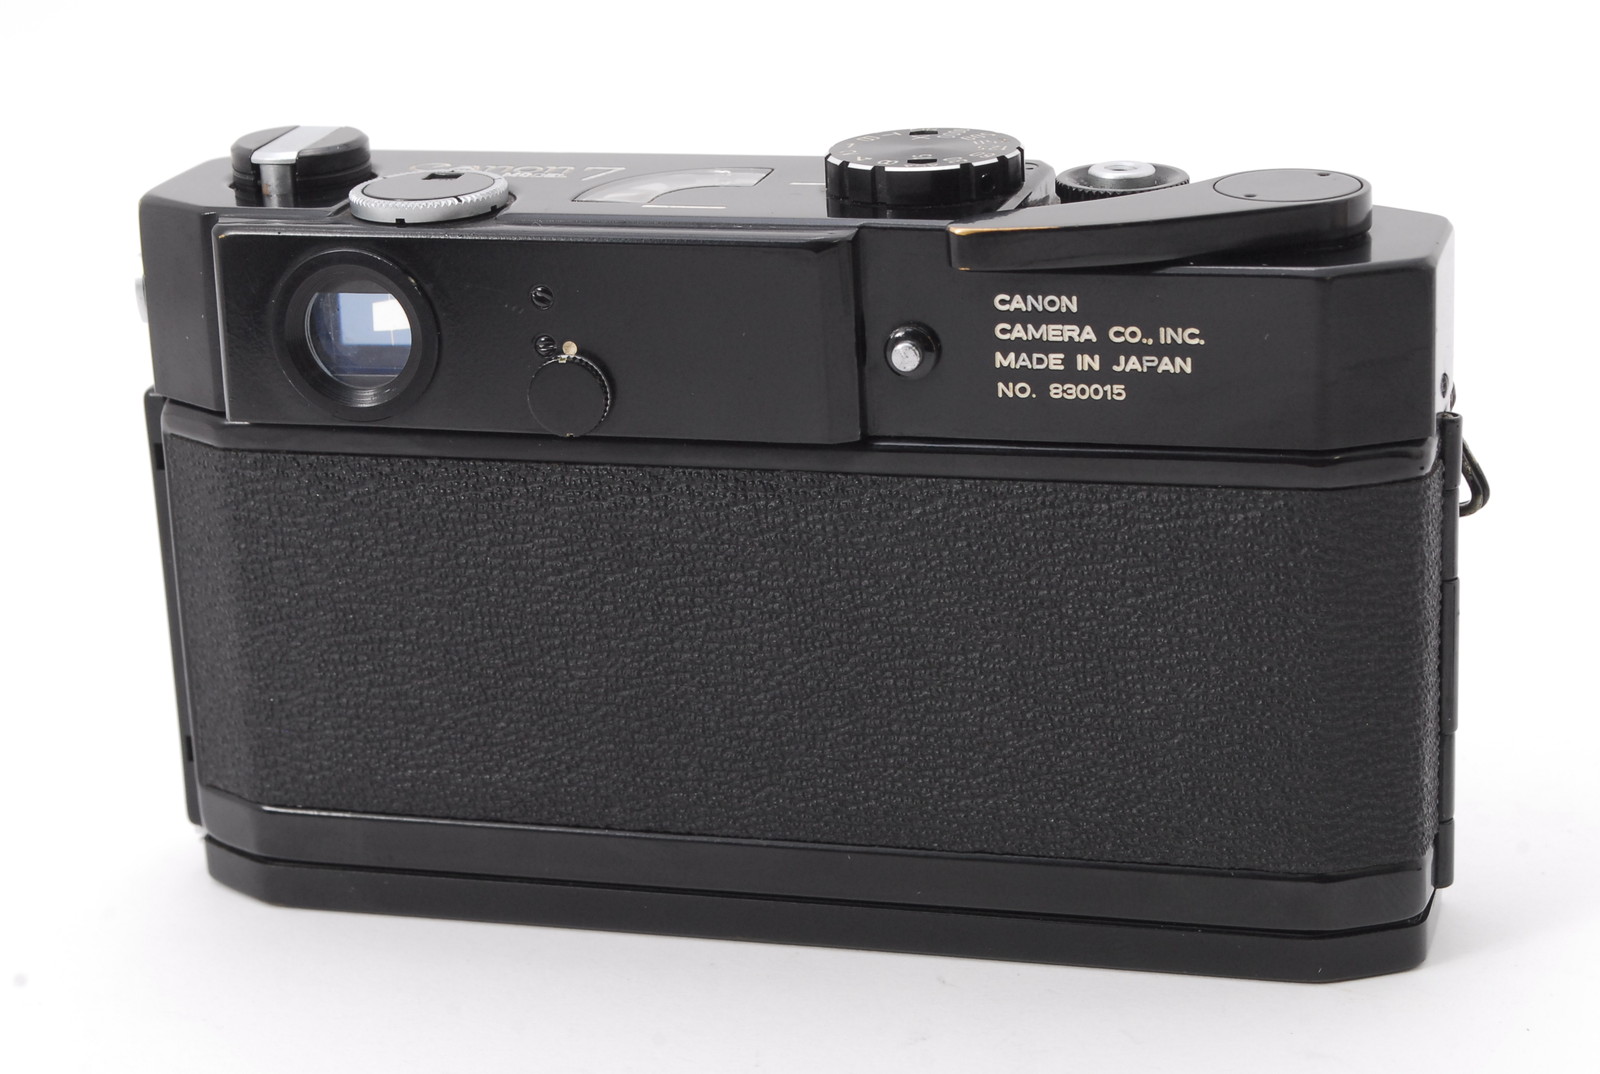 This Rare Black Paint Canon 7 Was a Leica M3 Competitor